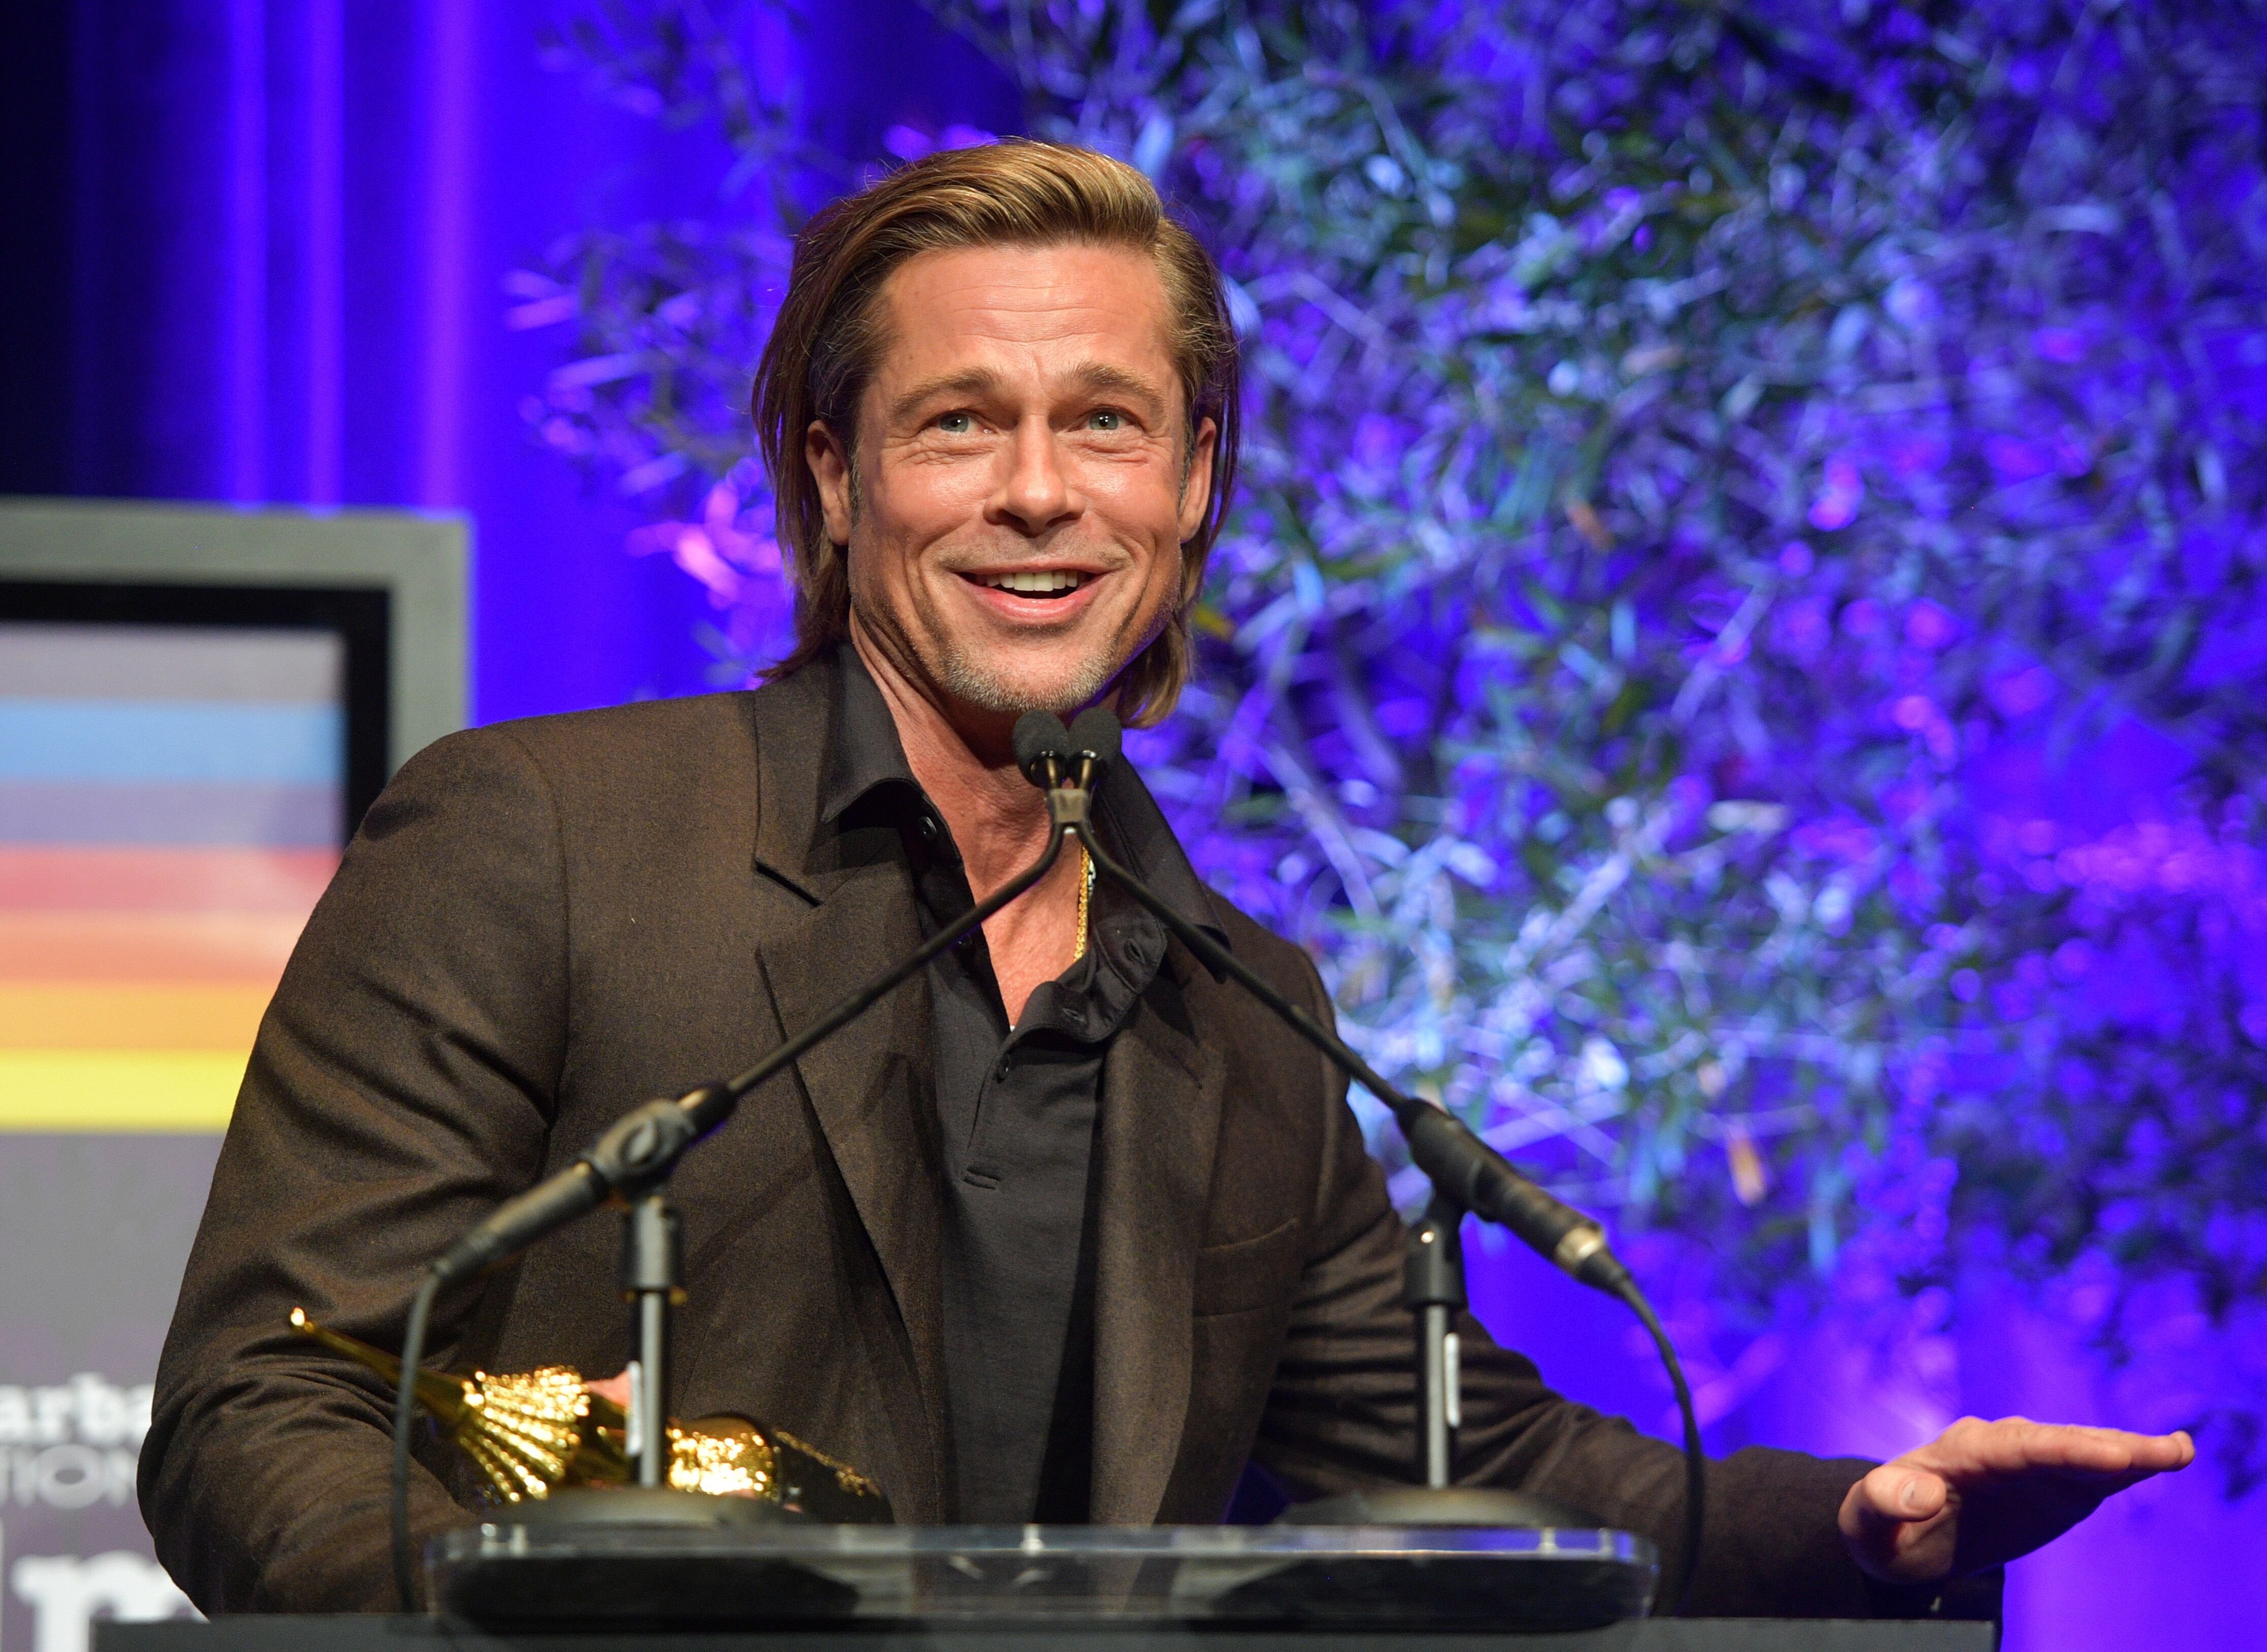 Brad Pitt accepts his SAG Award for "Once Upon a Time in Hollywood" | Source: Getty Images/GlobalImagesUkraine